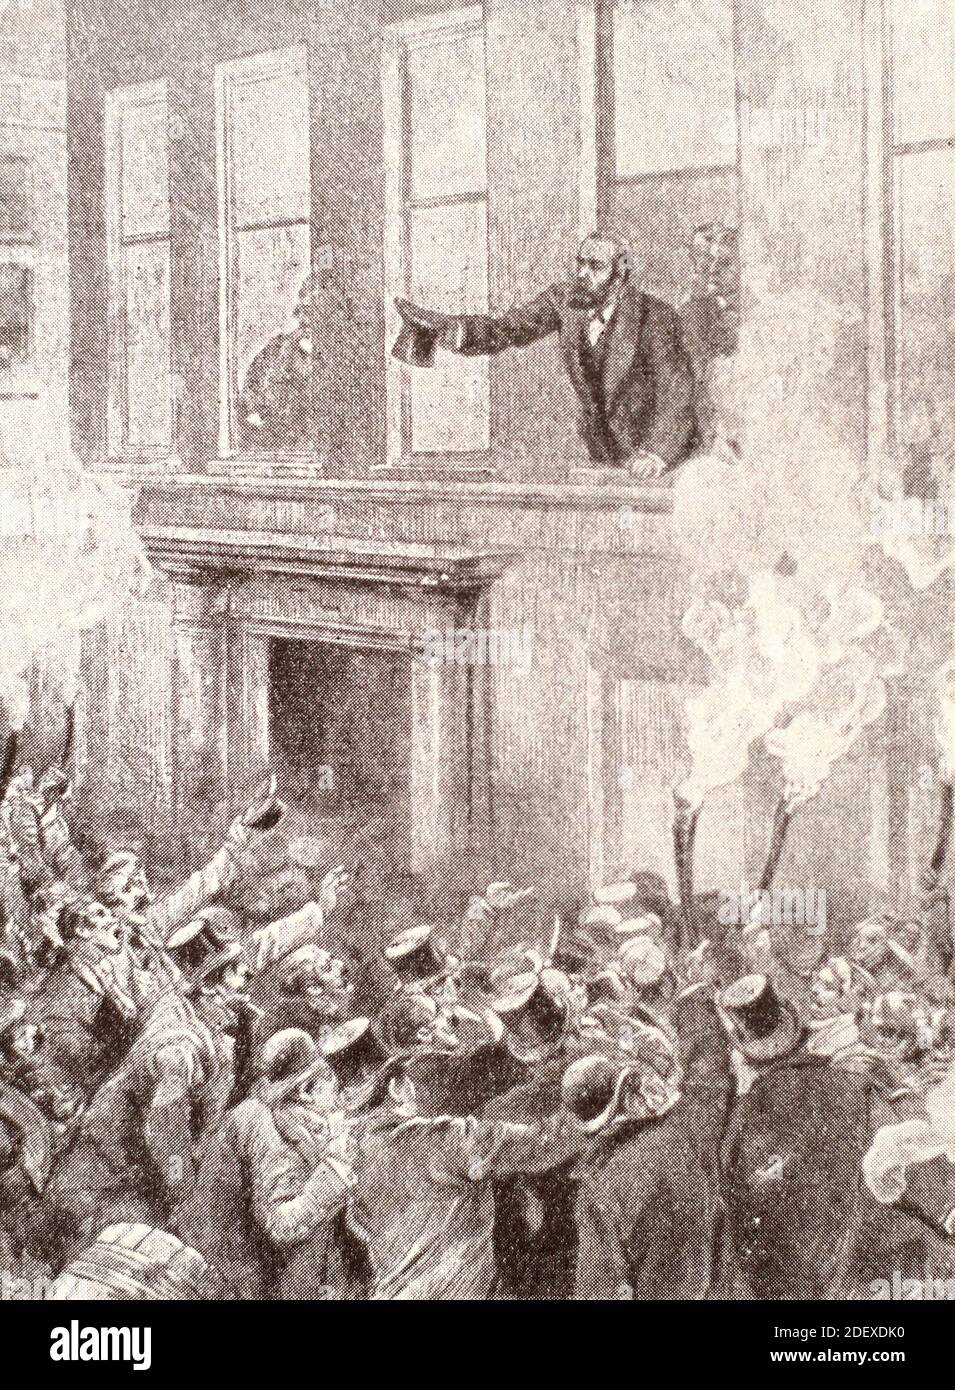 Speech of Charles Stewart Parnell to the voters. Engraving of 1890. Charles Stewart Parnell (27 June 1846 – 6 October 1891) was an Irish nationalist politician who served as Leader of the Irish Parliamentary Party from 1882 to 1891 and Leader of the Home Rule League from 1880 to 1882. He served as a member of parliament (MP) from 1875 to 1891. His party held the balance of power in the House of Commons during the Home Rule debates of 1885–1890. Stock Photo